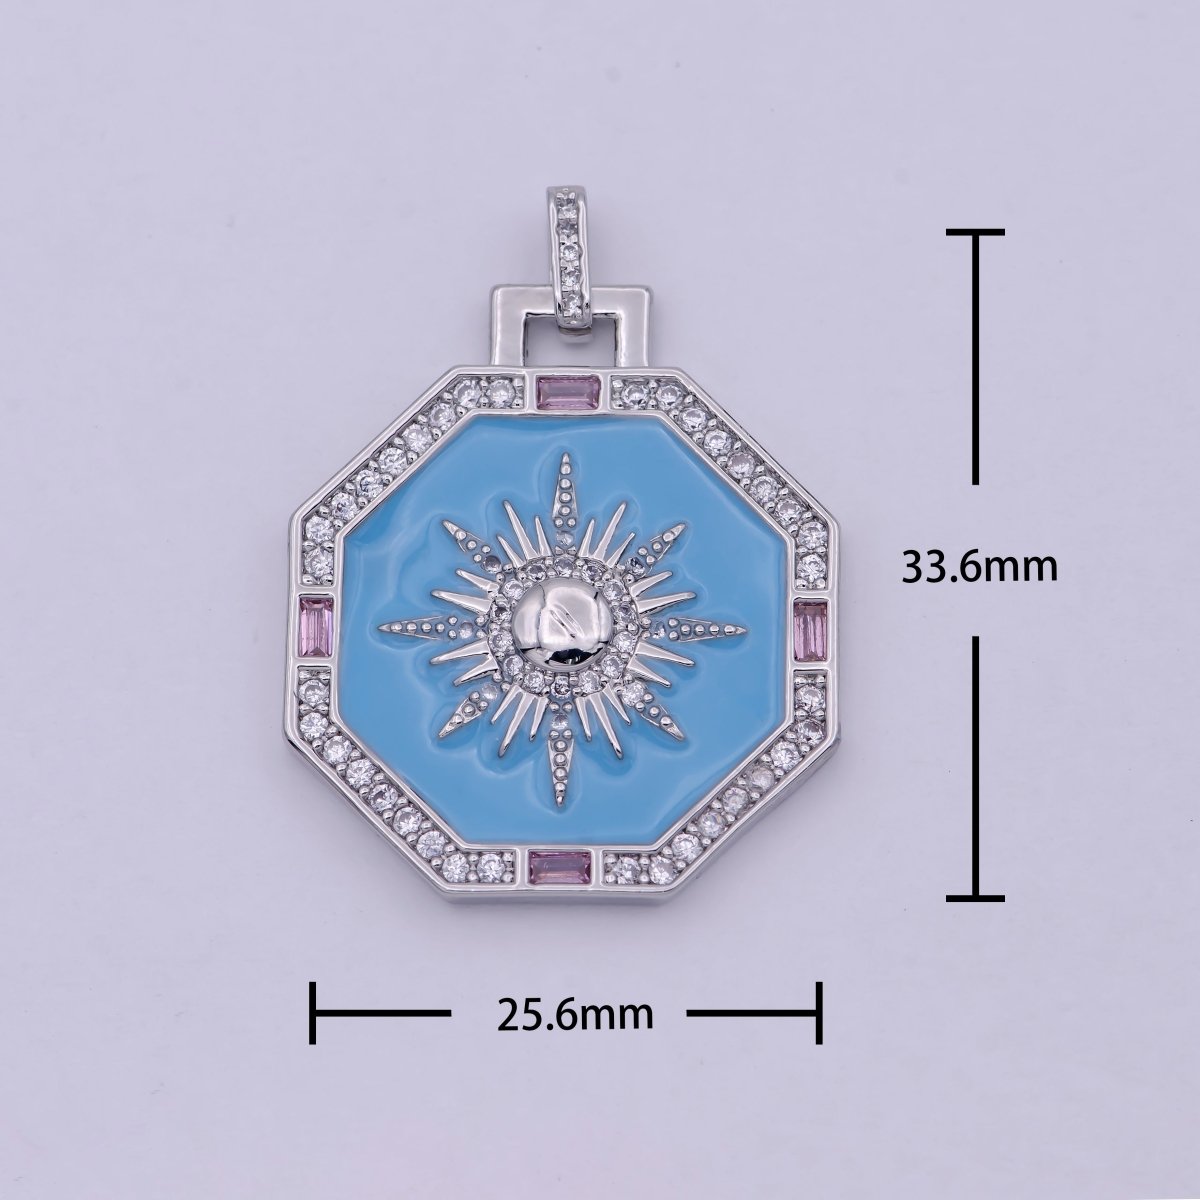 Blue Enamel Celestial Pendant Sun Ray Dainty Charm for Necklace Findings for Jewelry Making B-930 H-109 - DLUXCA